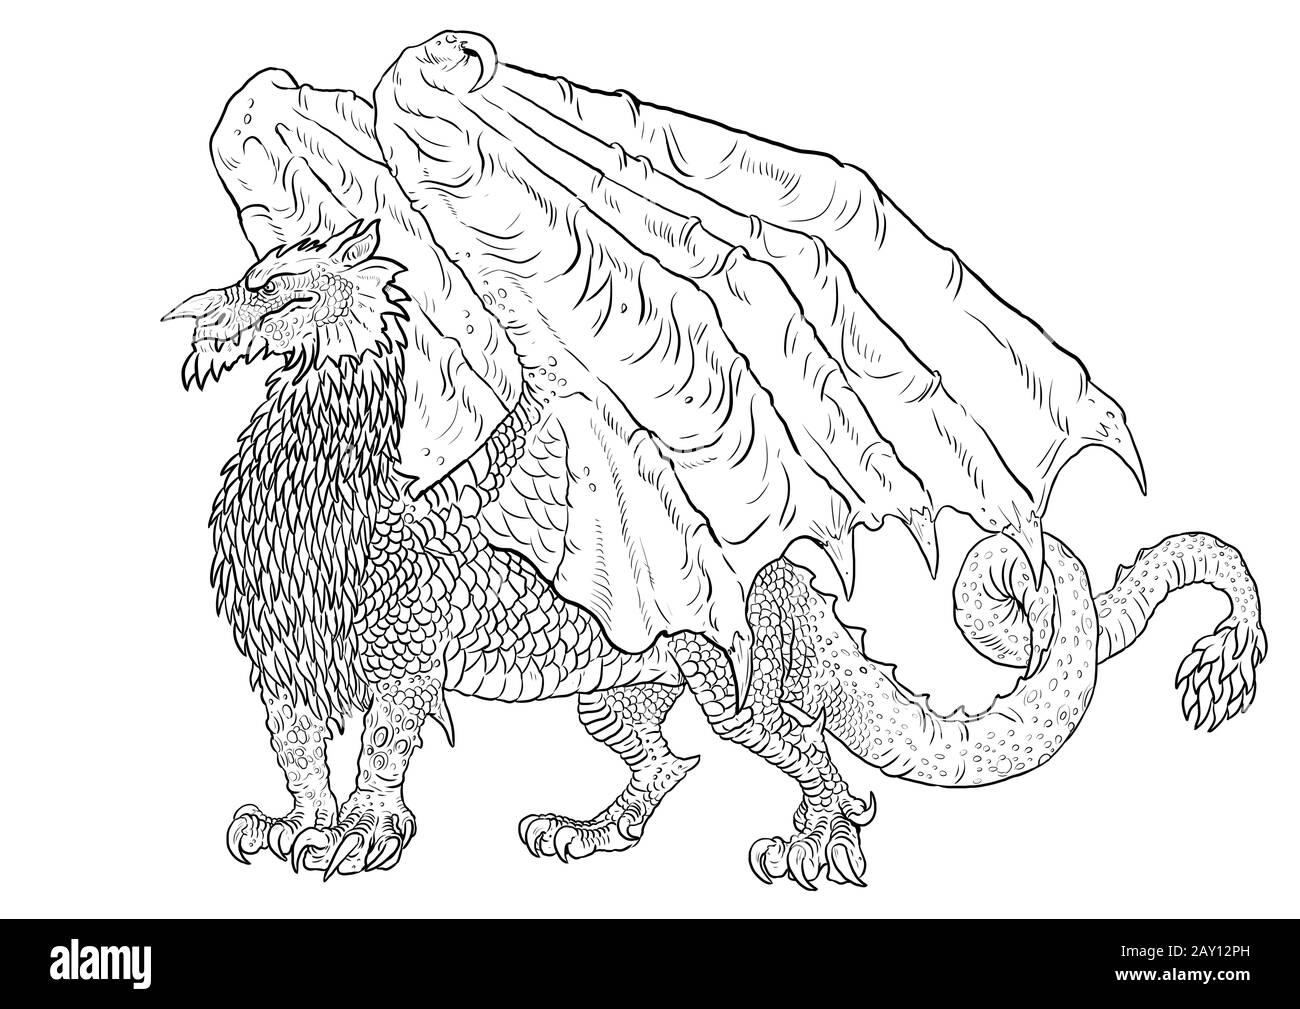 cool dragon coloring pages